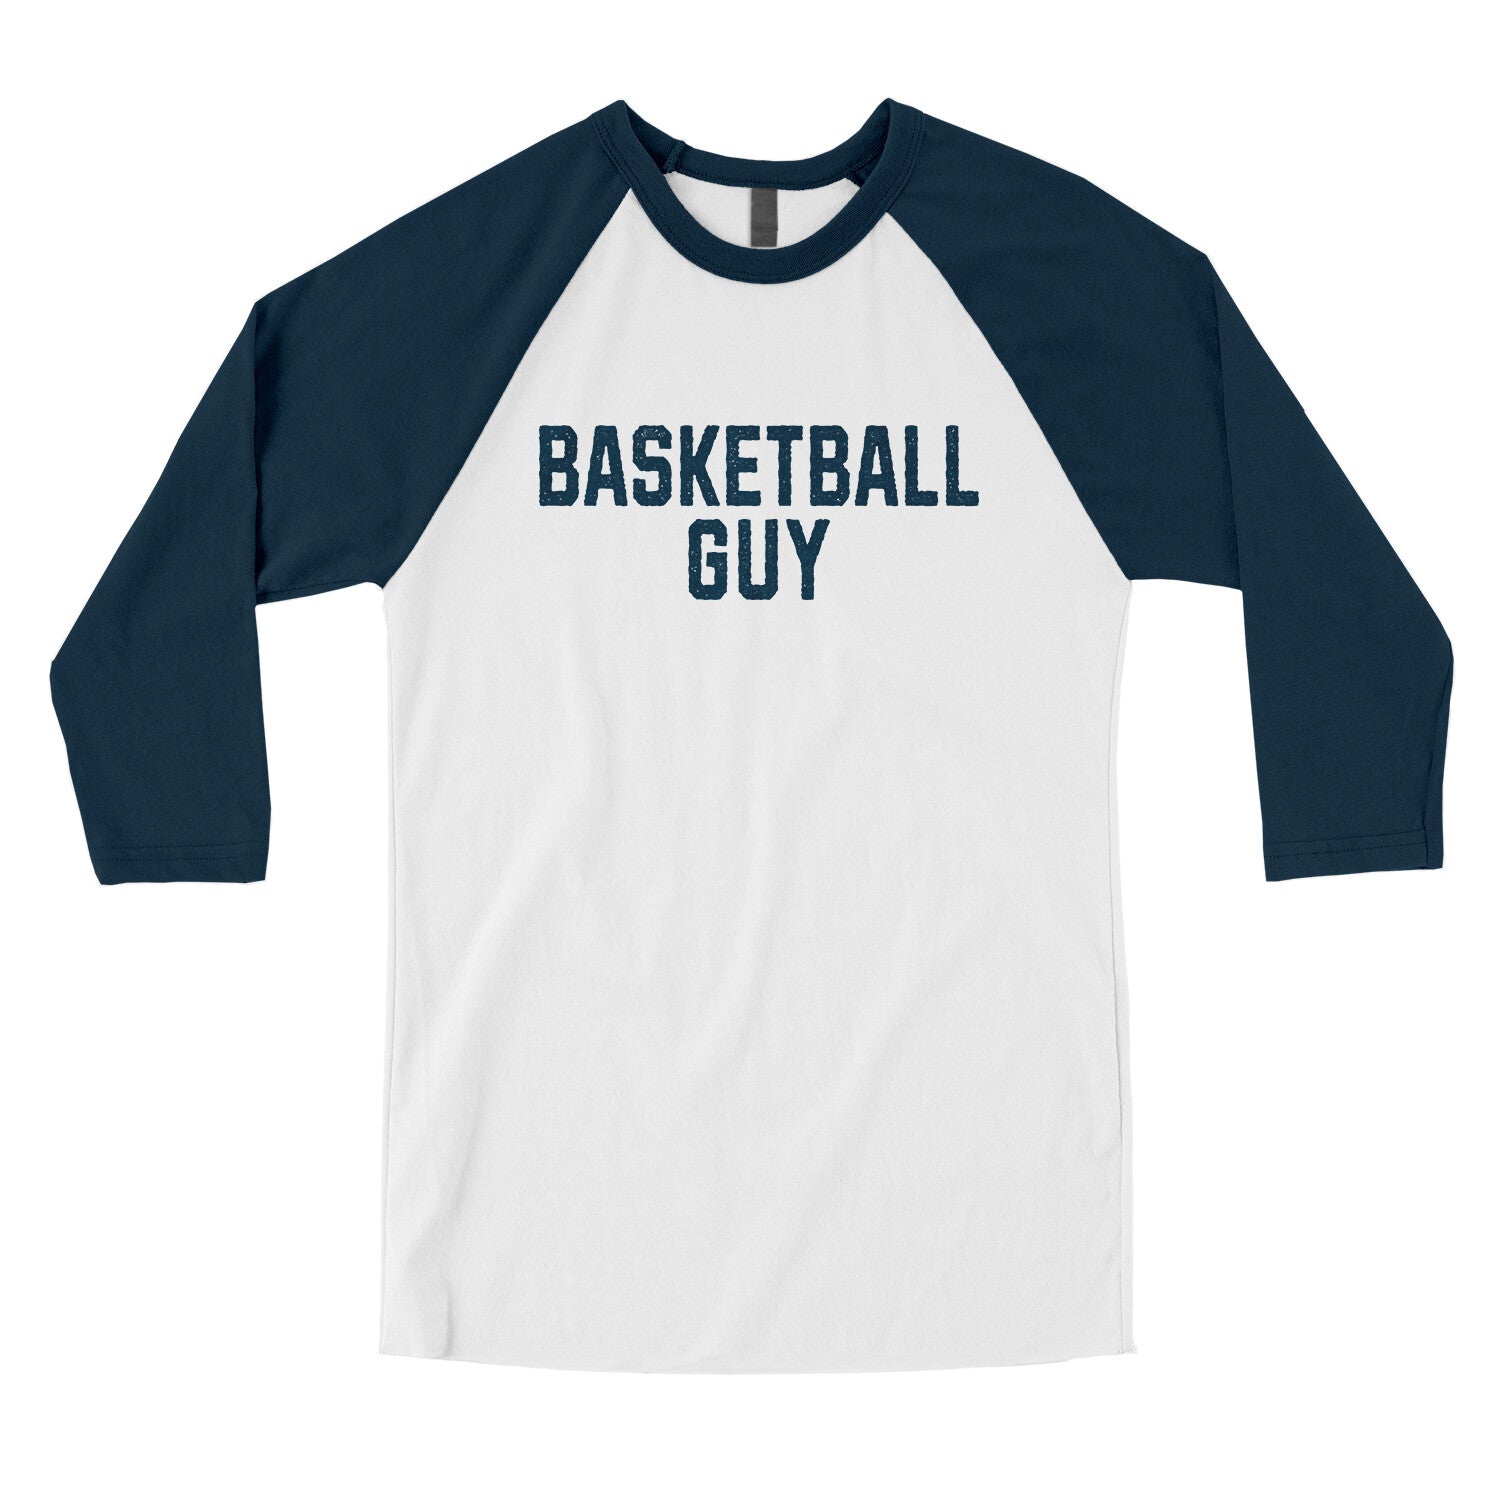 Basketball Guy in White with Navy Color